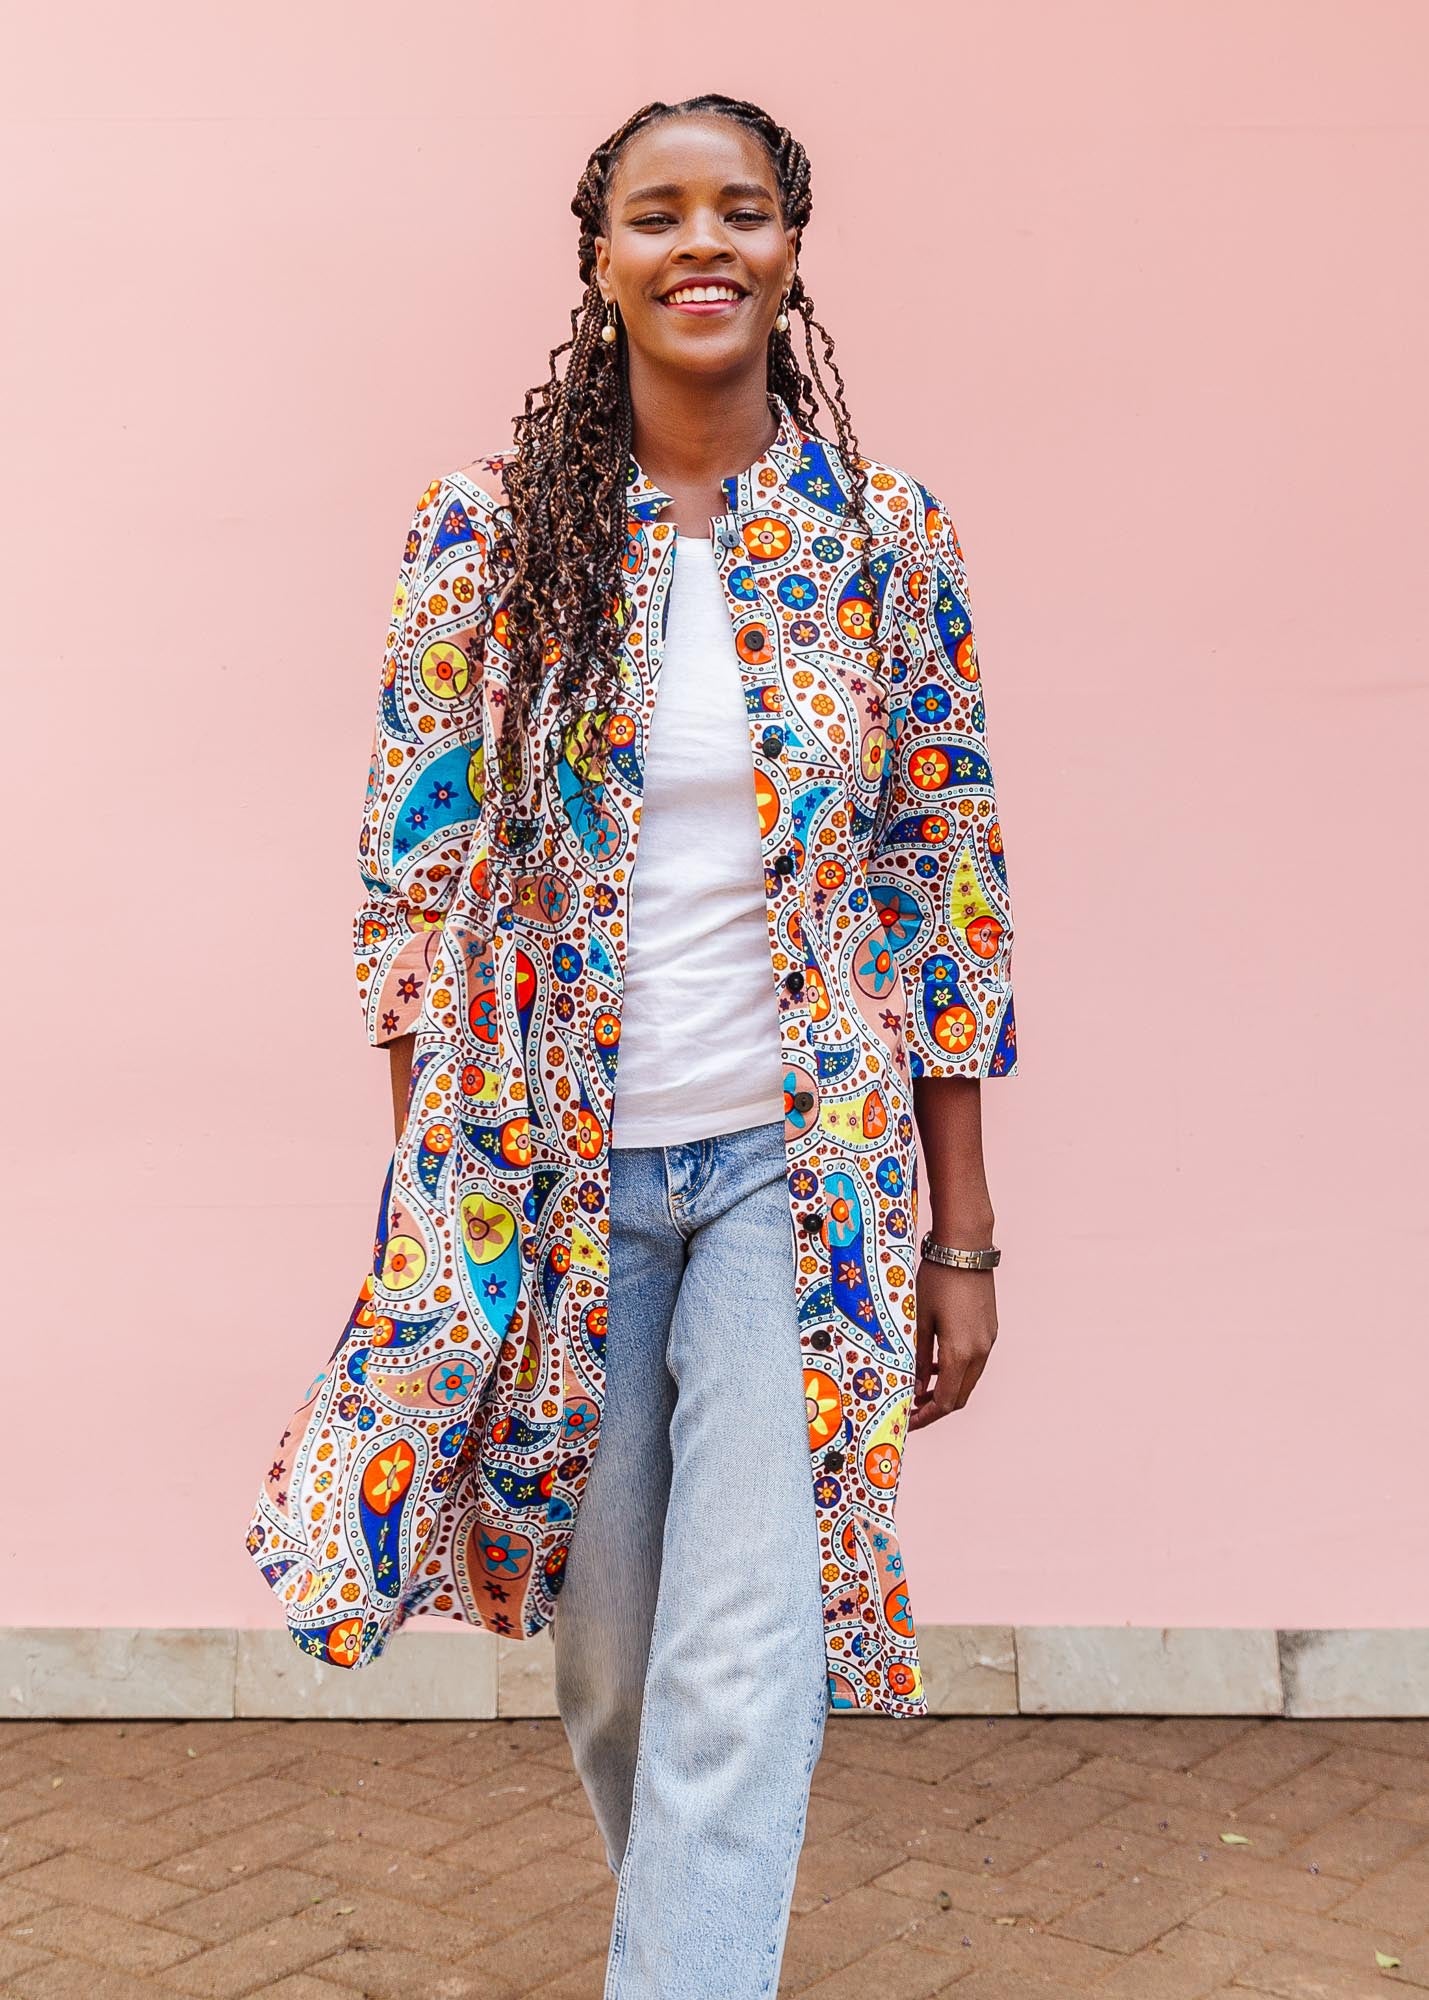 The model is wearing multi-colored paisley print 